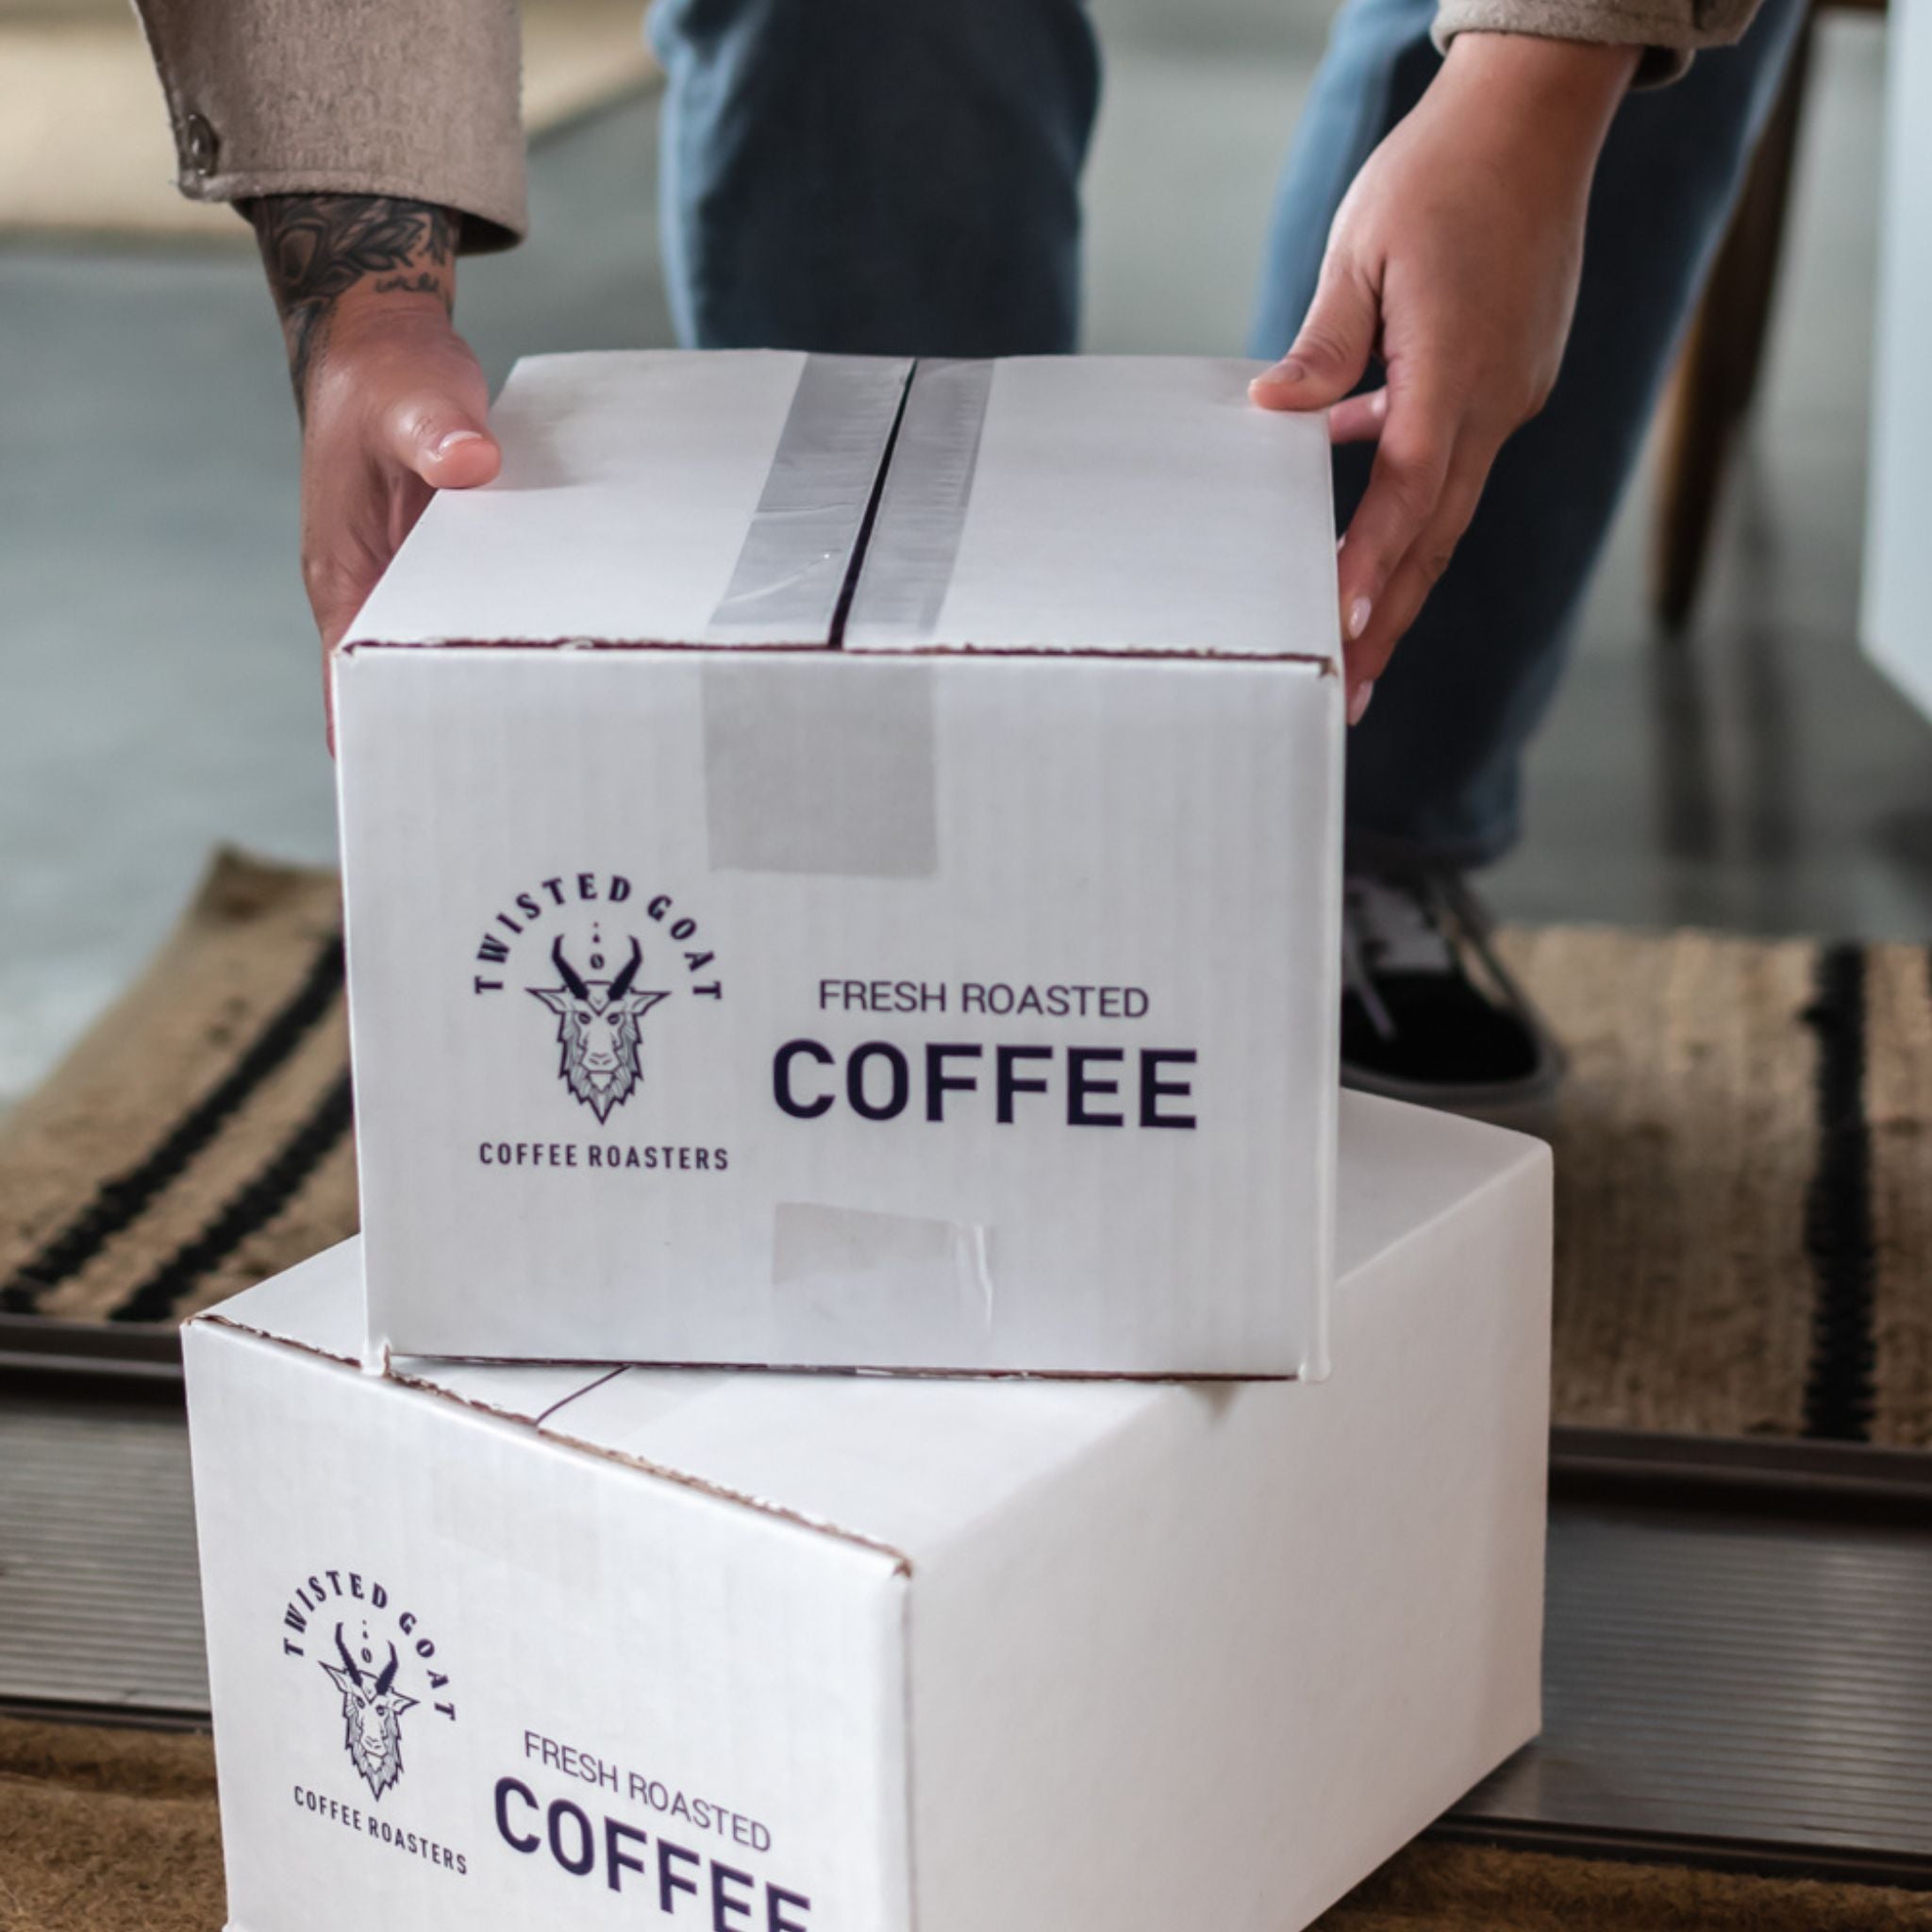 coffee subscription canada home delivery